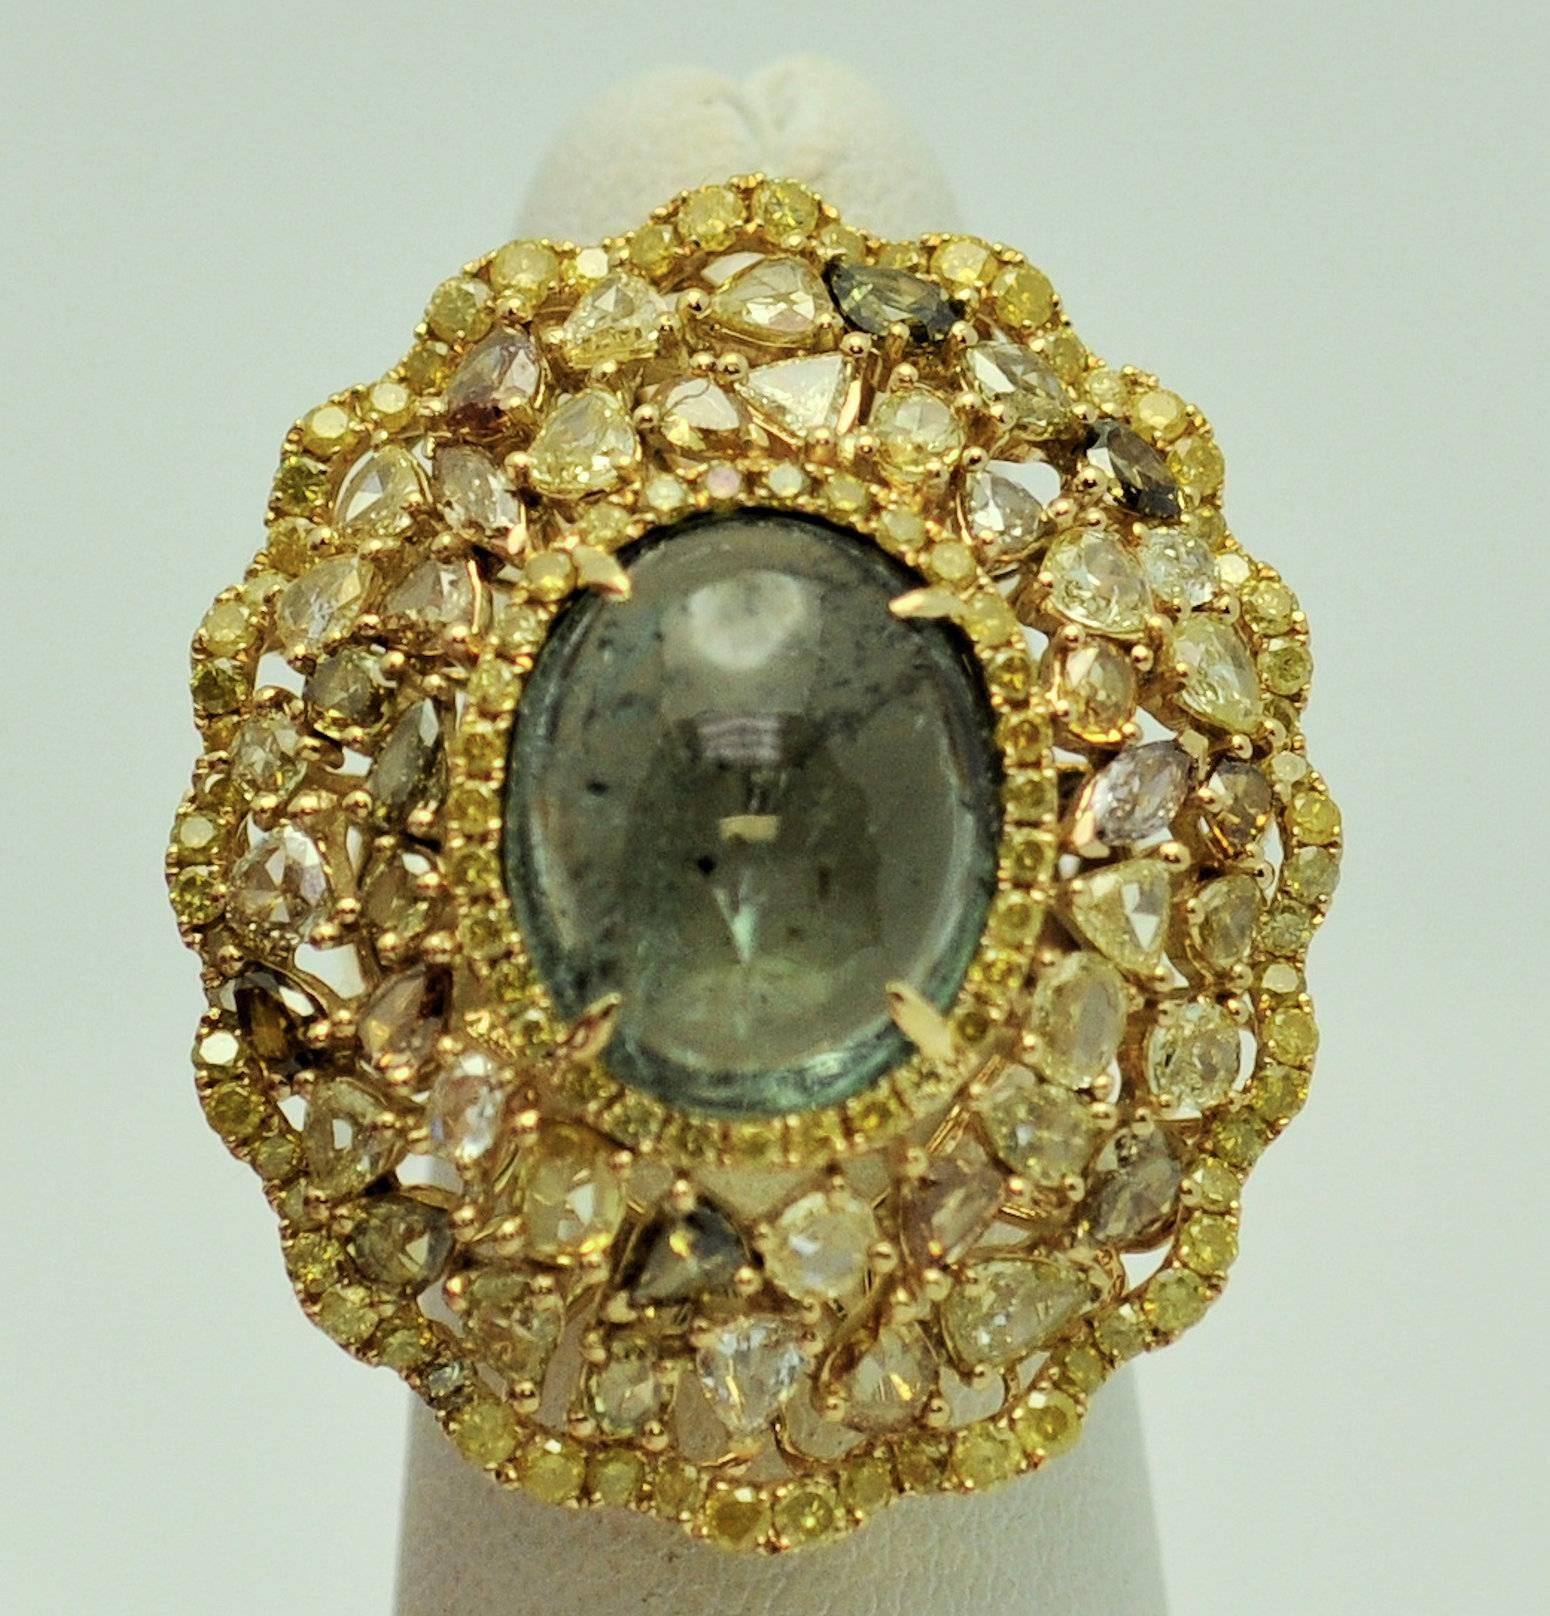 18Karat ring with center cabachon of light green tourmaline measuring 14 x 10 mm.  Yellow diamonds surround the tourmaline and outer border of the ring. Colored diamonds set in the field. 
95 yellow round diamonds 1.00 carat total weight
46 mixed